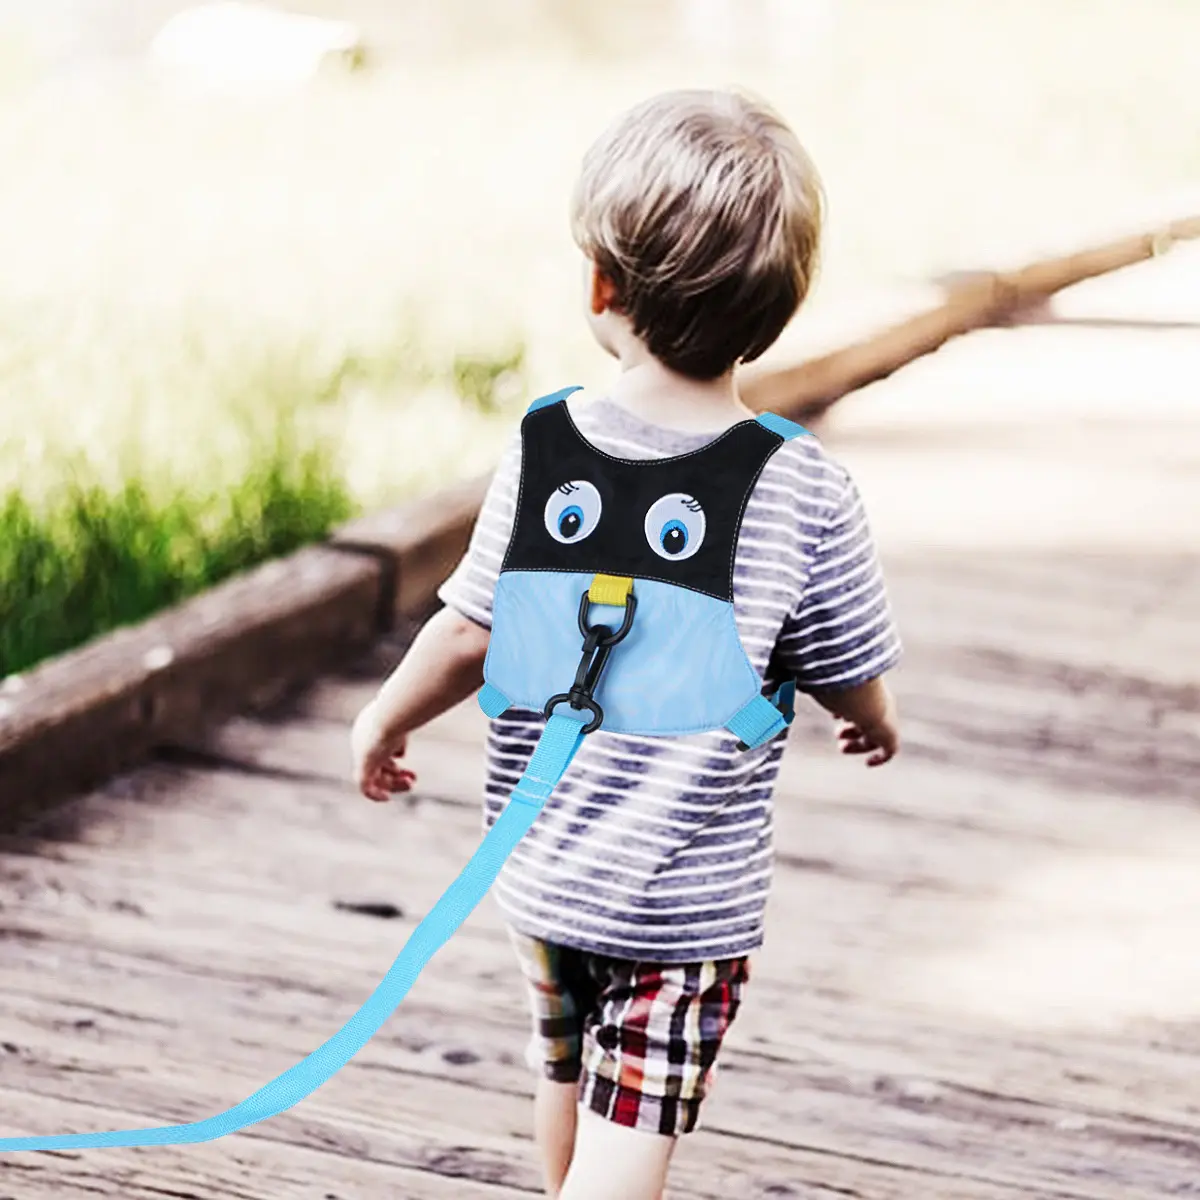 Anti Lost Wrist Link Child Safety Walking Wristband Assistant Strap Belt Toddlers Leash Backpack Harness for Kid